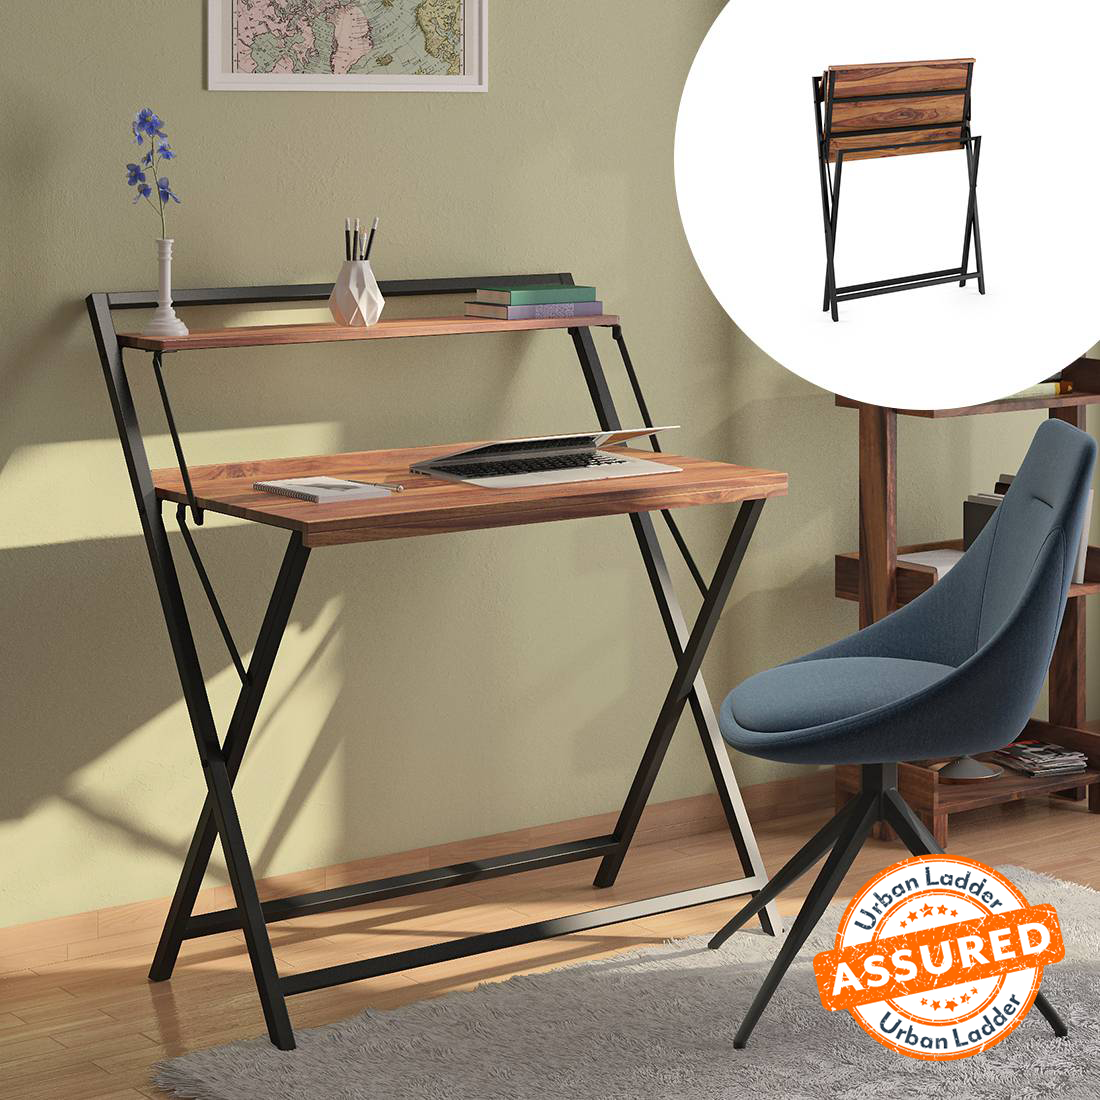 https://www.ulcdn.net/images/products/808273/original/Bruno_Study_Table_TK_LP.png?1683920689